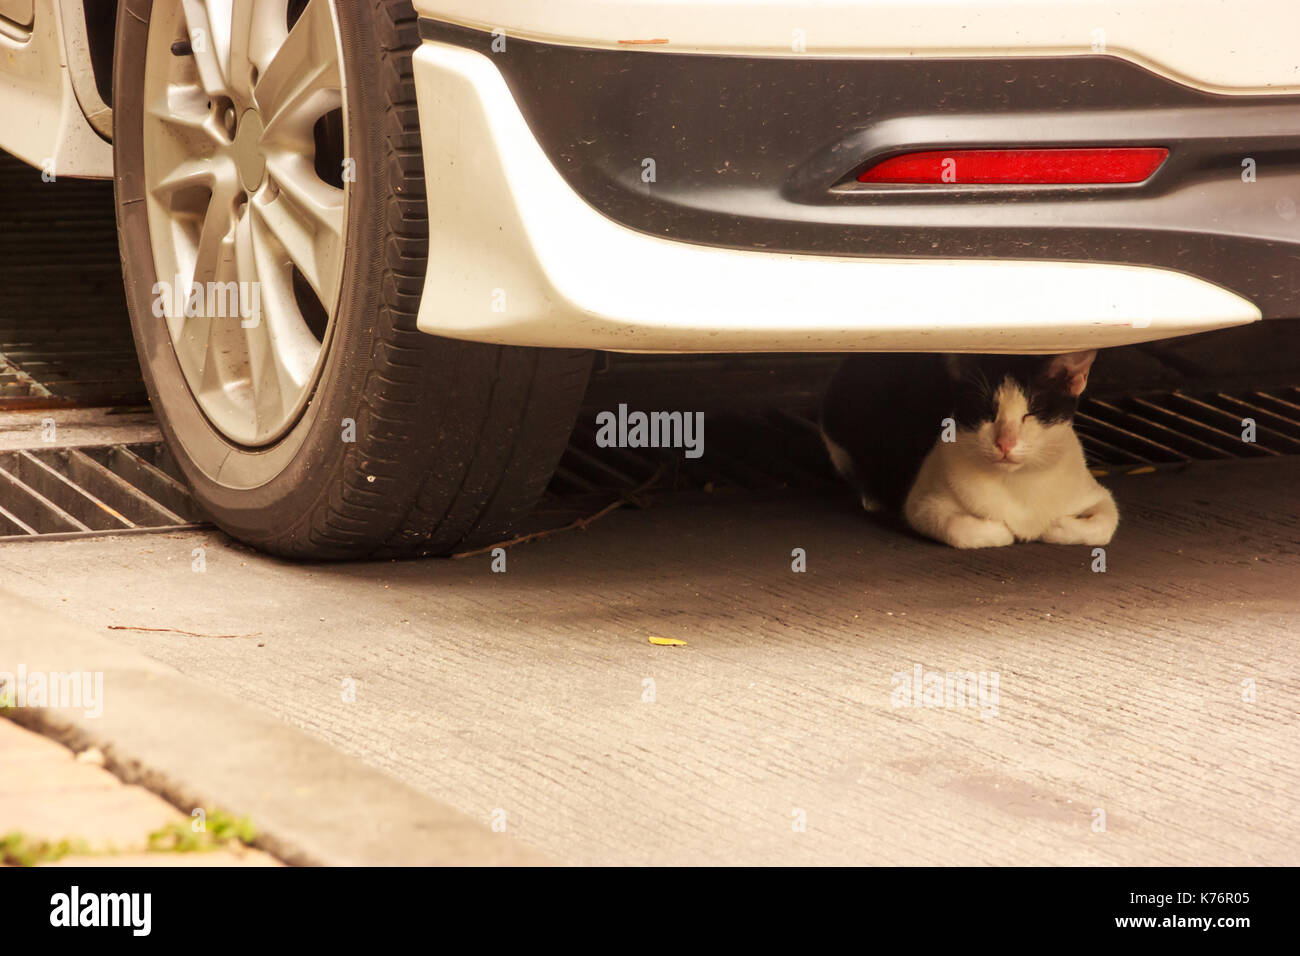 Black and white cat napping on floor under a car in daytime. Stock Photo